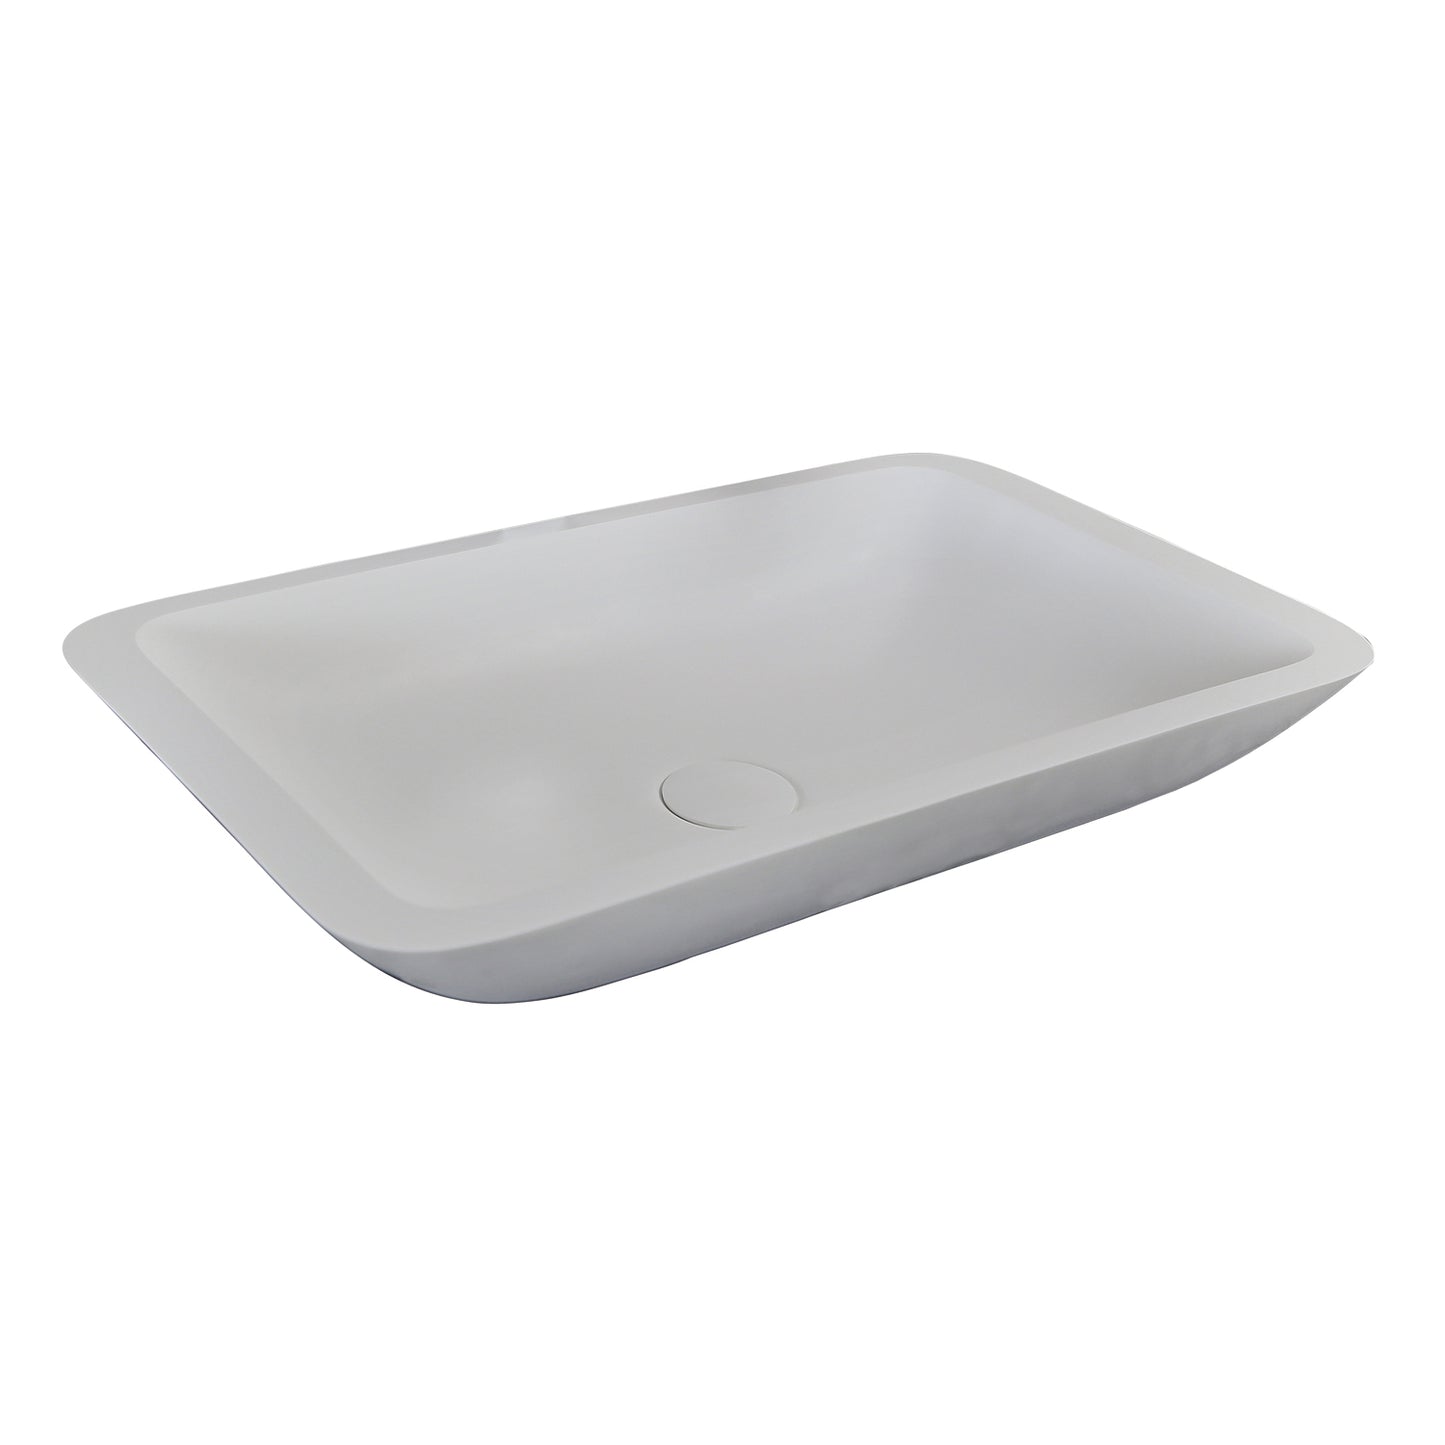 Mariano Resin 24" x 14" Rectangle Vessel Sink with Matte White Finish